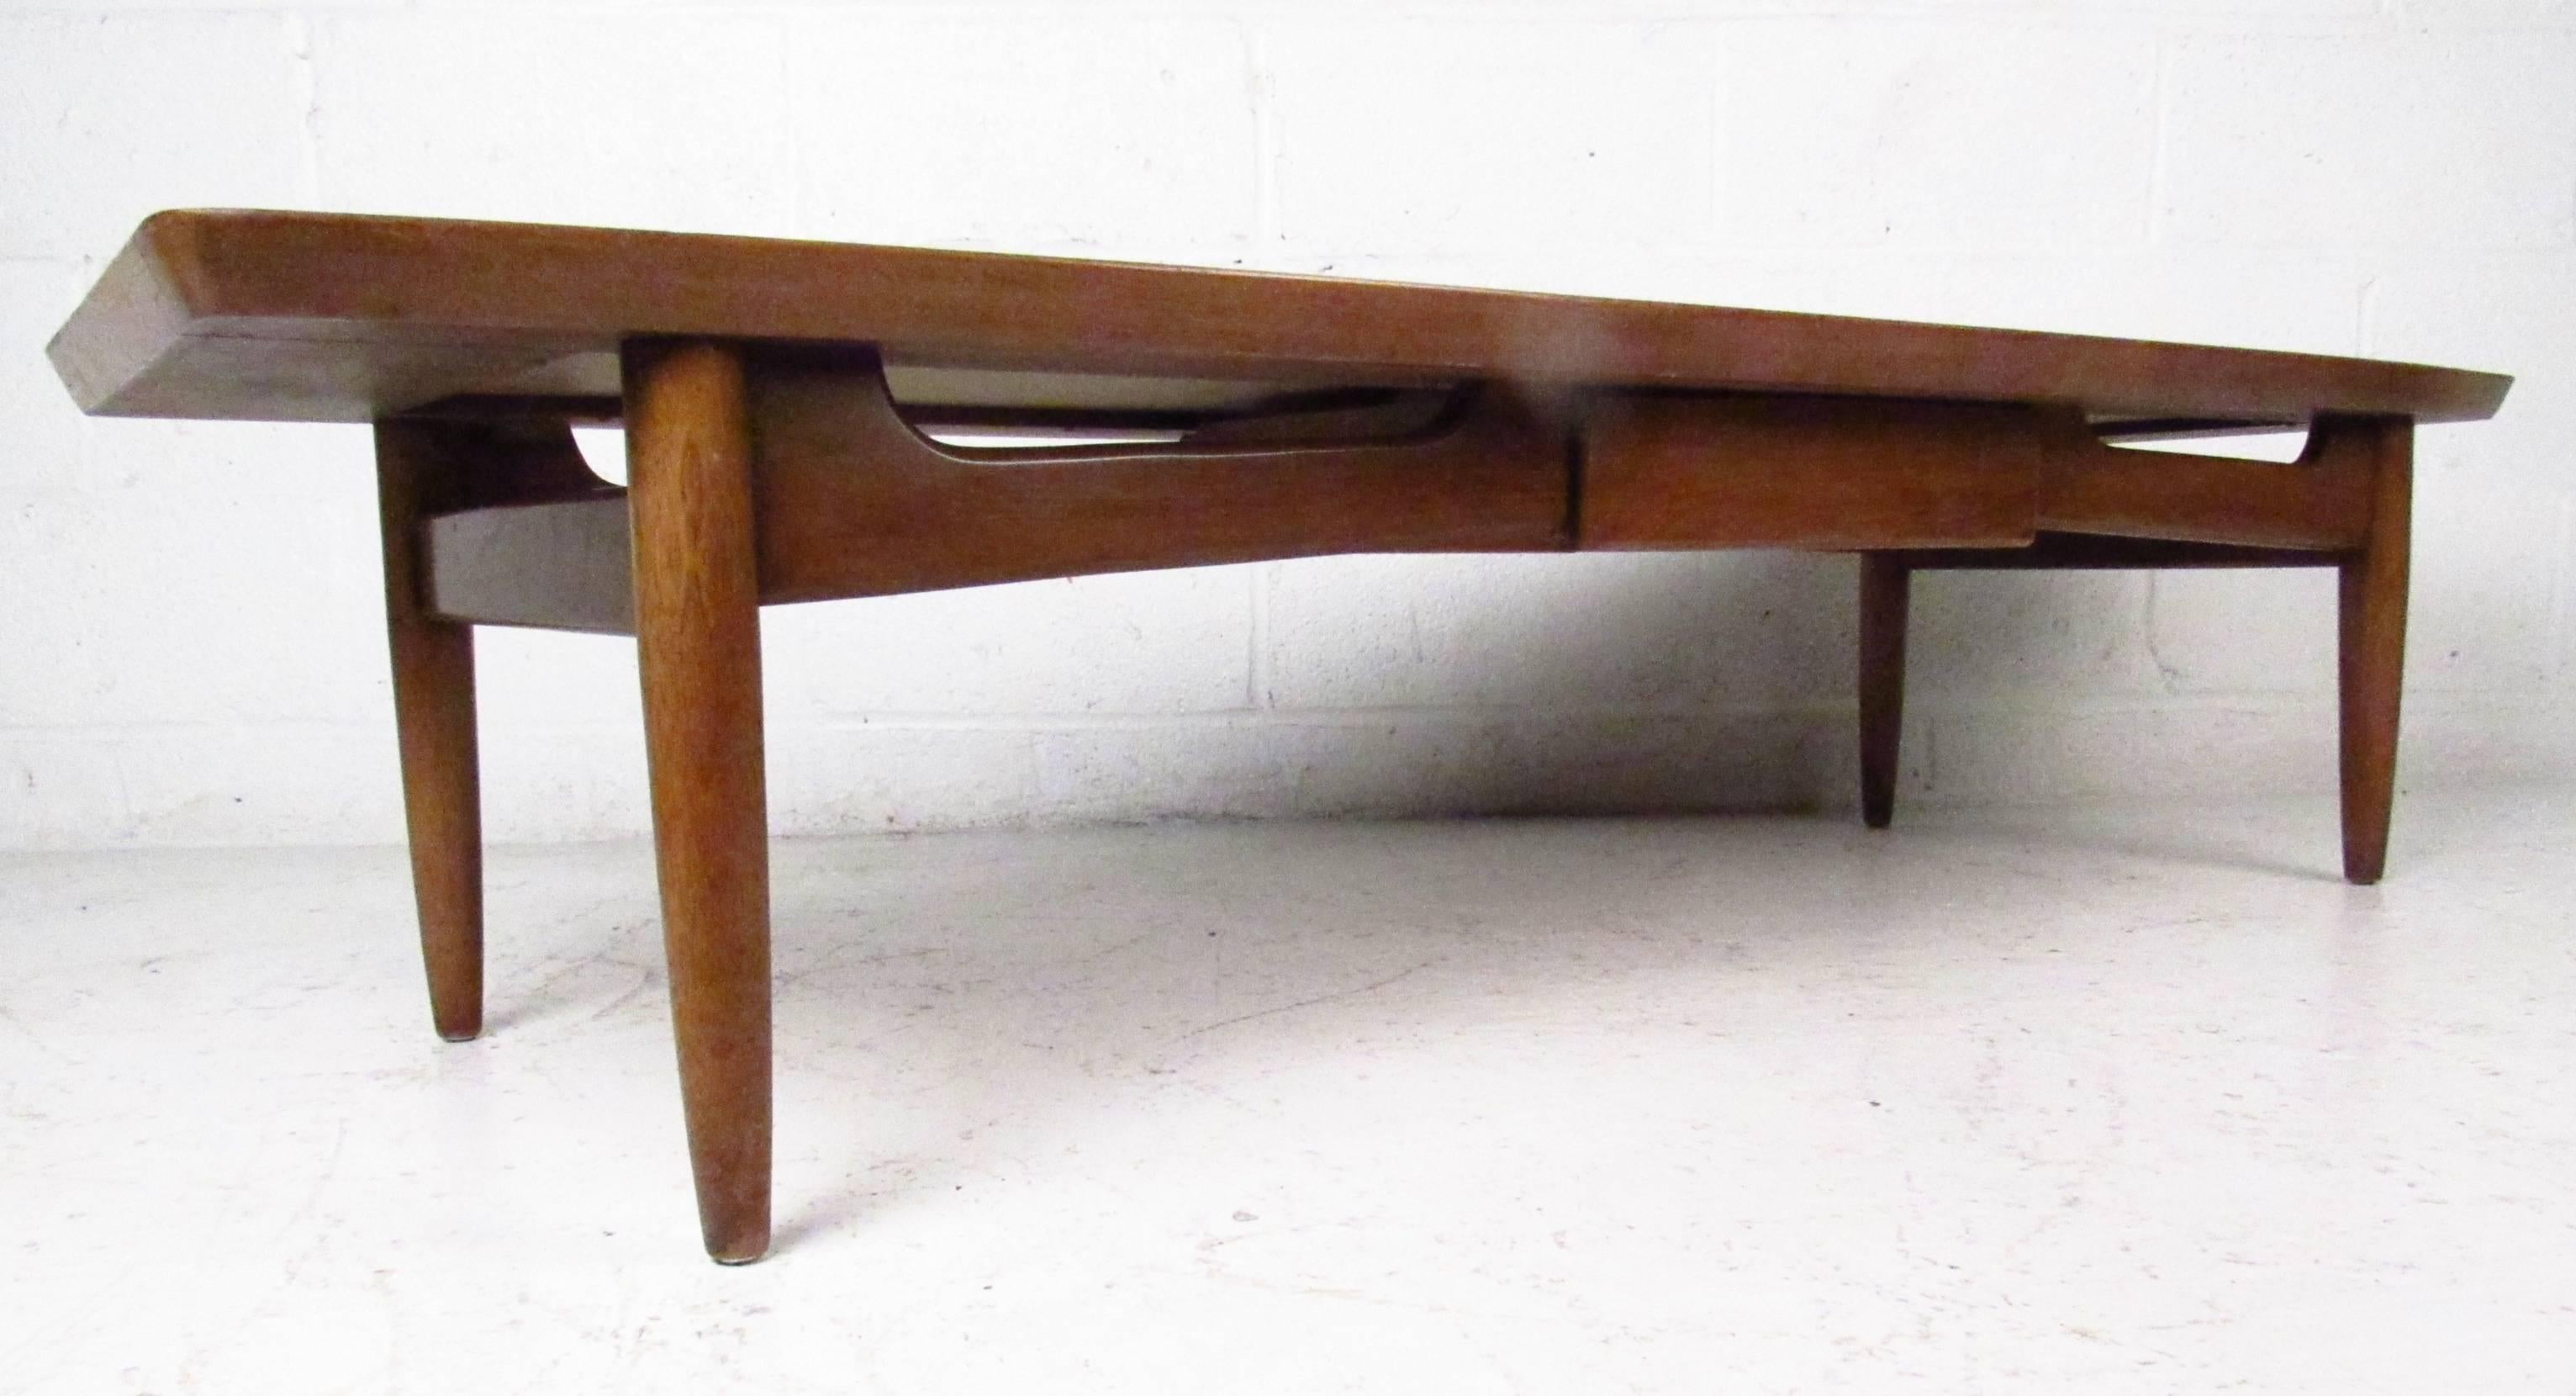 Long mid-century modern coffee table features walnut construction with laminate black top insert. Tapered legs and middle shelf add to the stylish vintage design and versatility of the piece.


(Please confirm item location - NY or NJ - with dealer)
